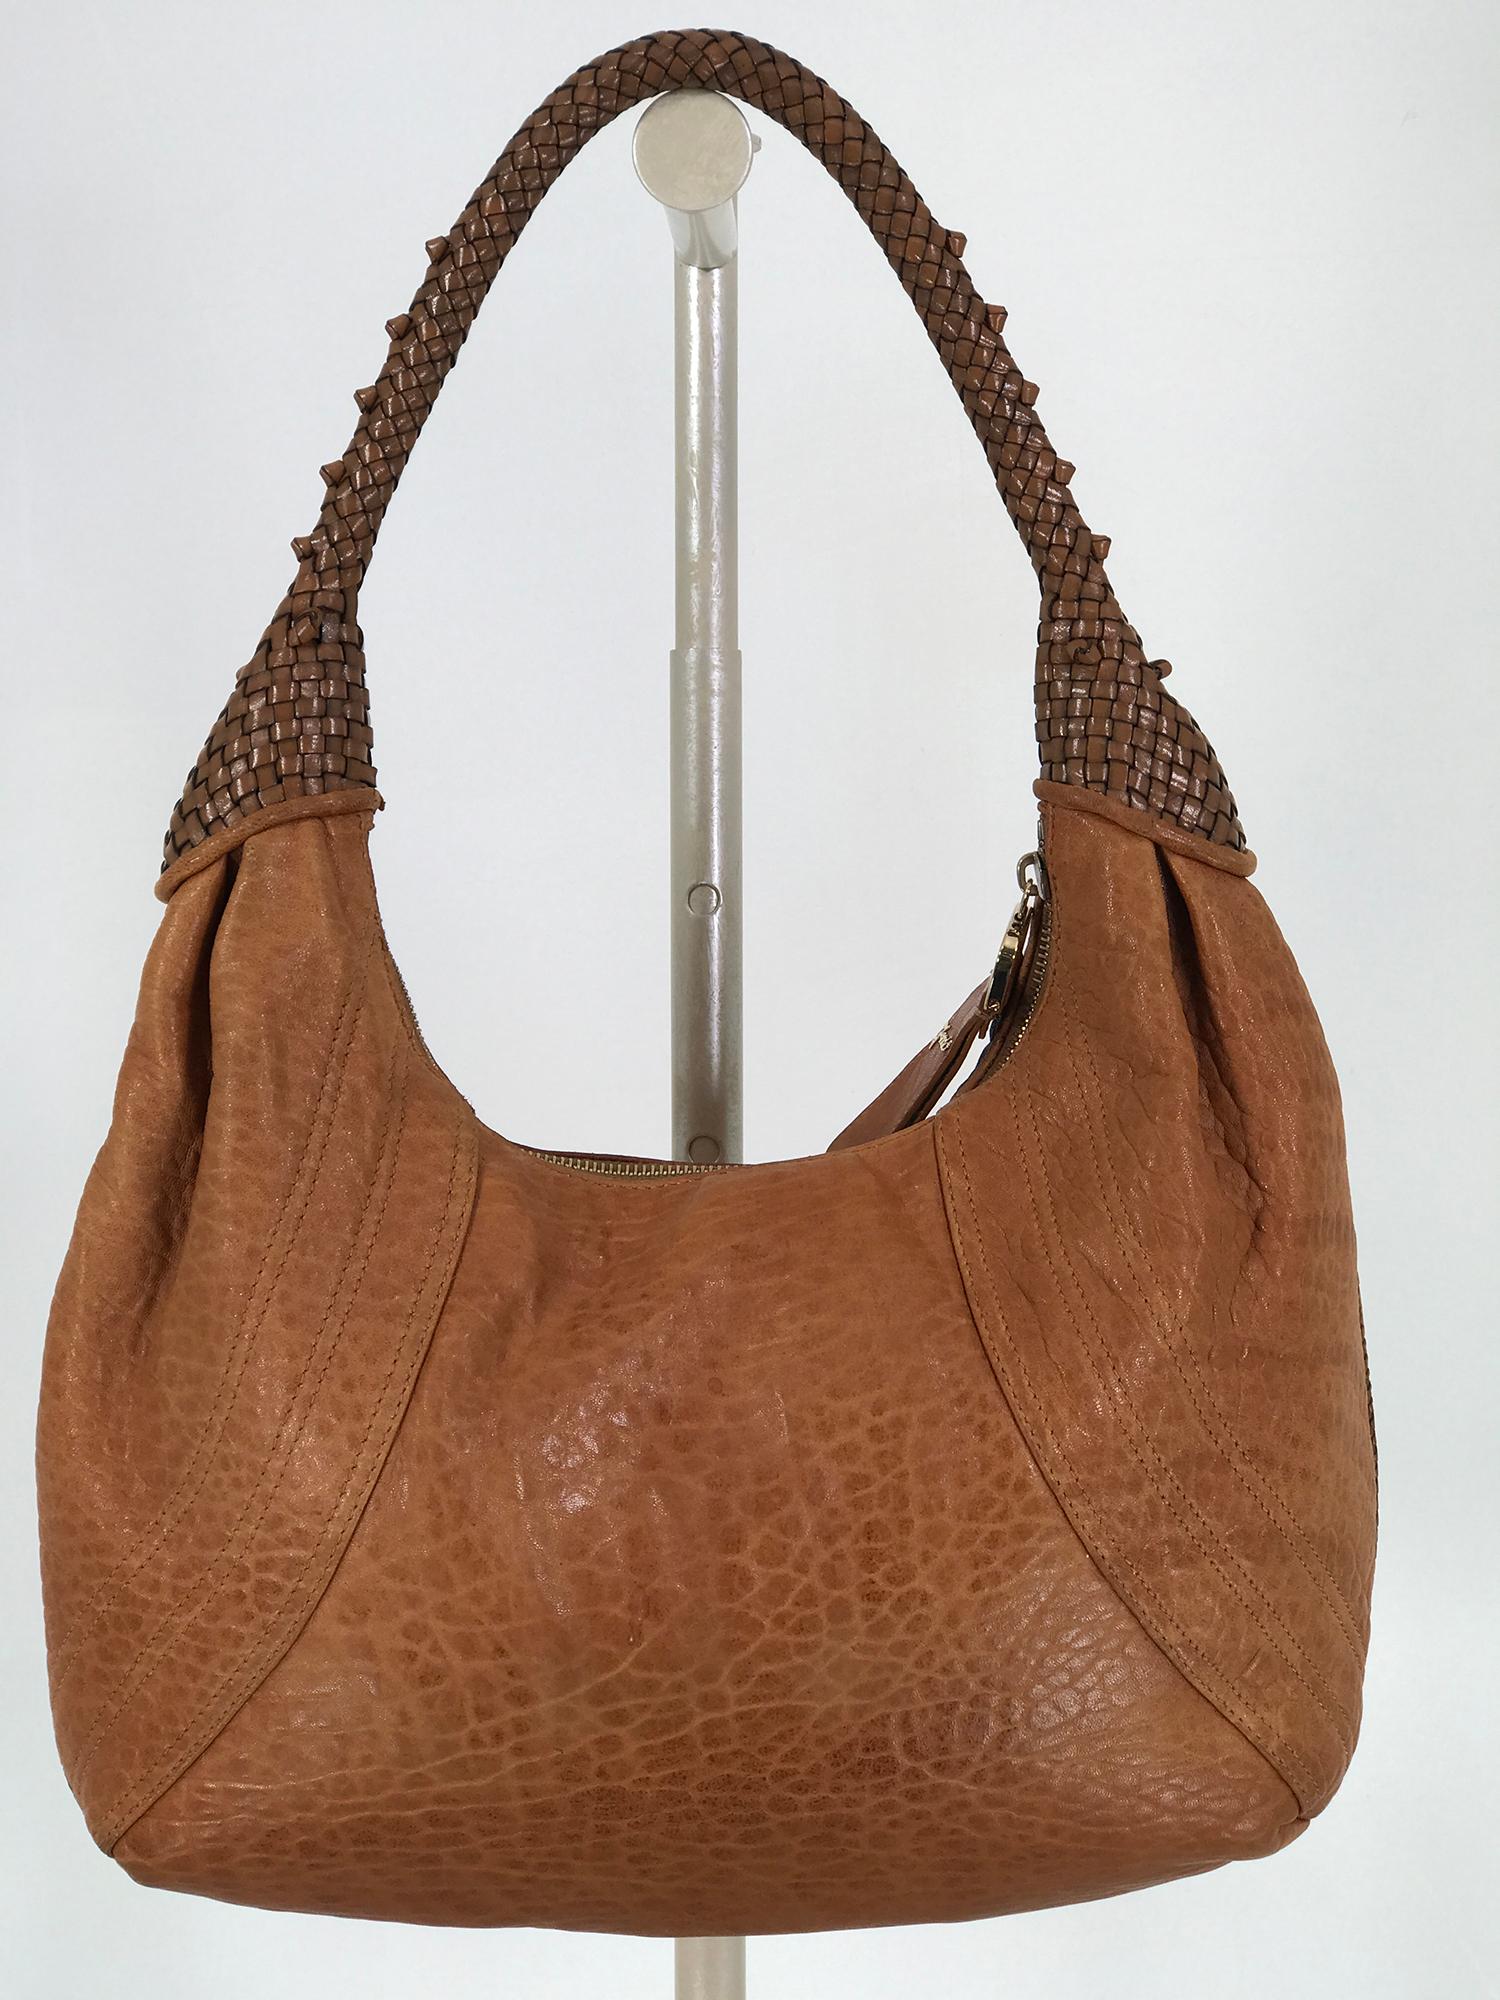 Fendi Spy Boho should bag in caramel leather, with Zucca lining. Braided Spy handle, the bag is a softly textured leather in a warm caramel shade, the bag has a braided welt cord seam running down the outside of the bag. Chunky gold brass zipper